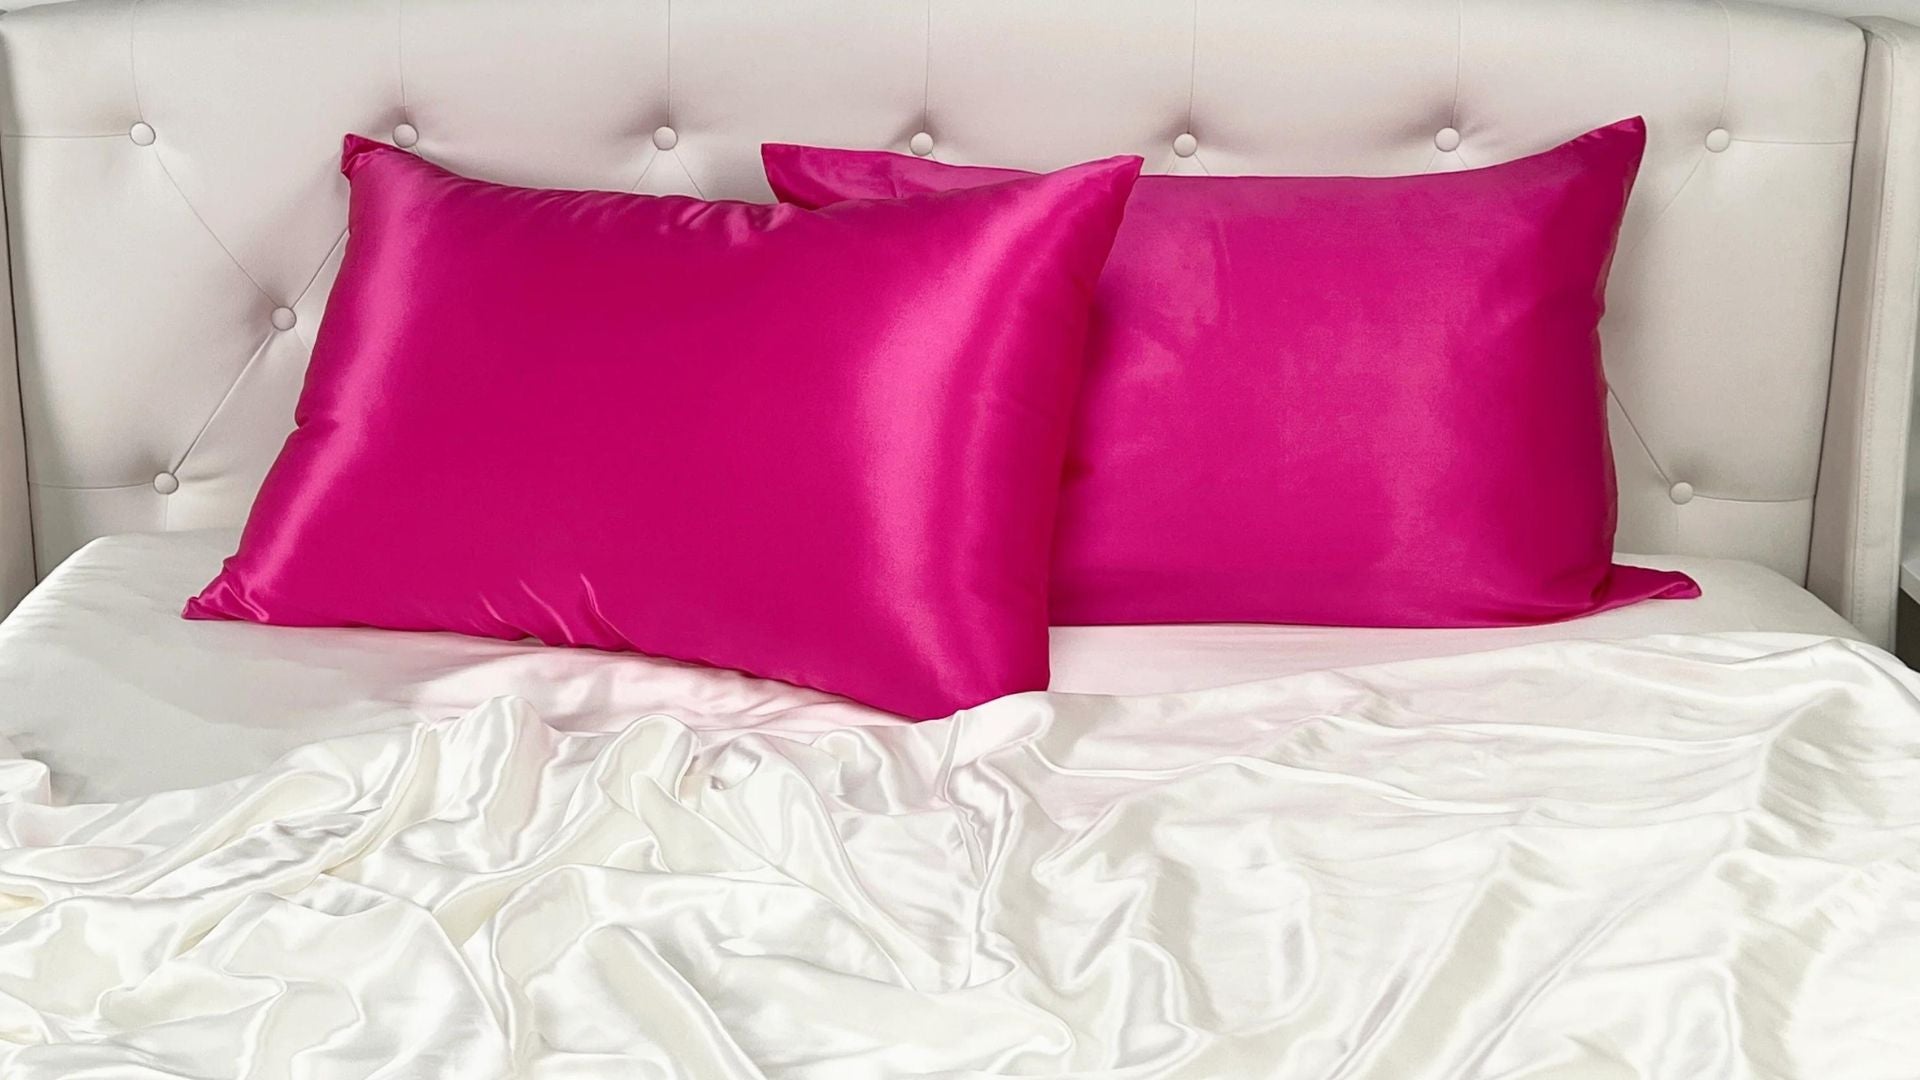 The Real Deal on Silk Pillowcases - Are They Truly Worth It?